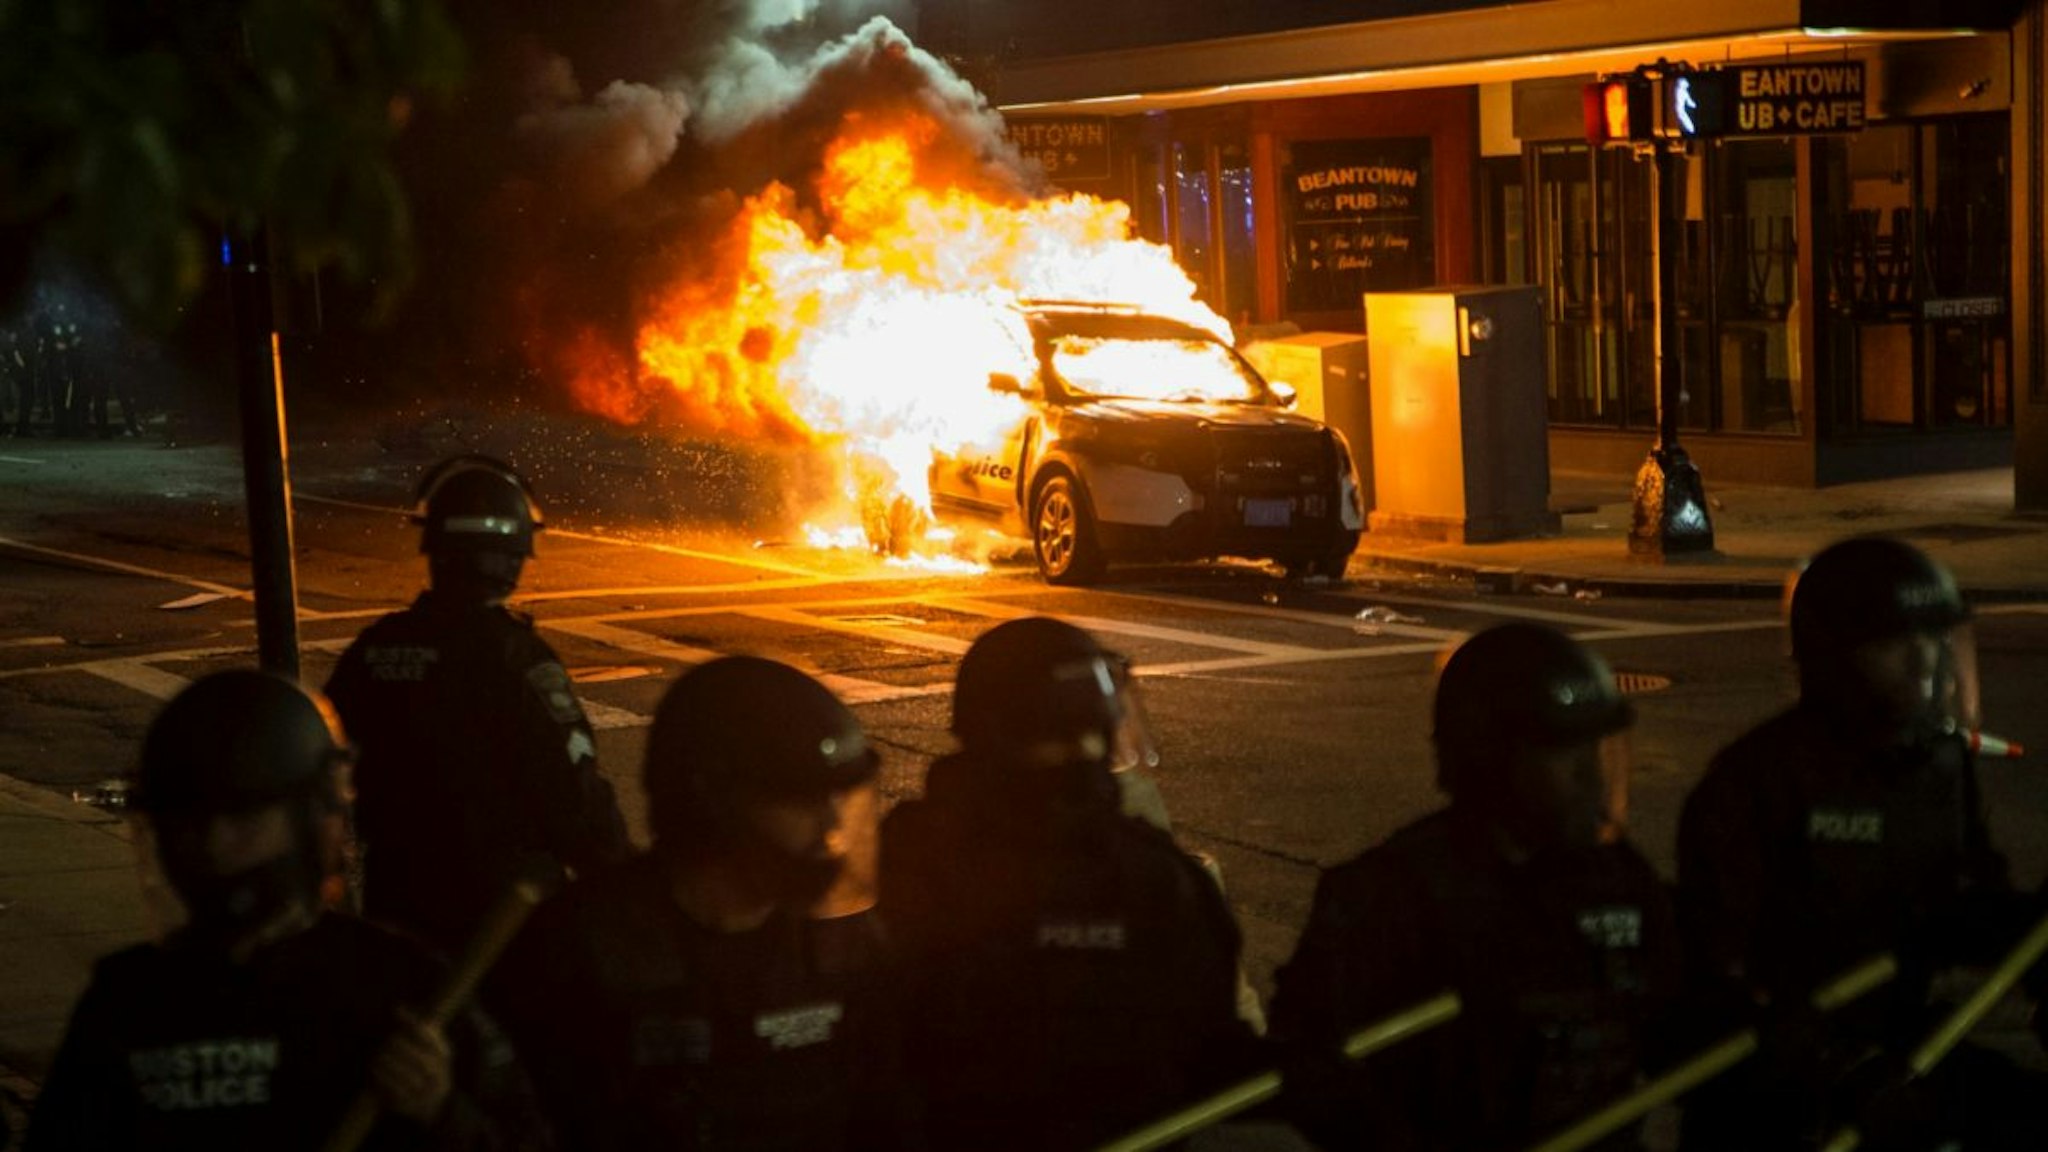 A police cruiser burns behind the Police line near the intersection of Park and Tremont as a protest against police brutality pushes through the streets of Boston on May 31, 2020.